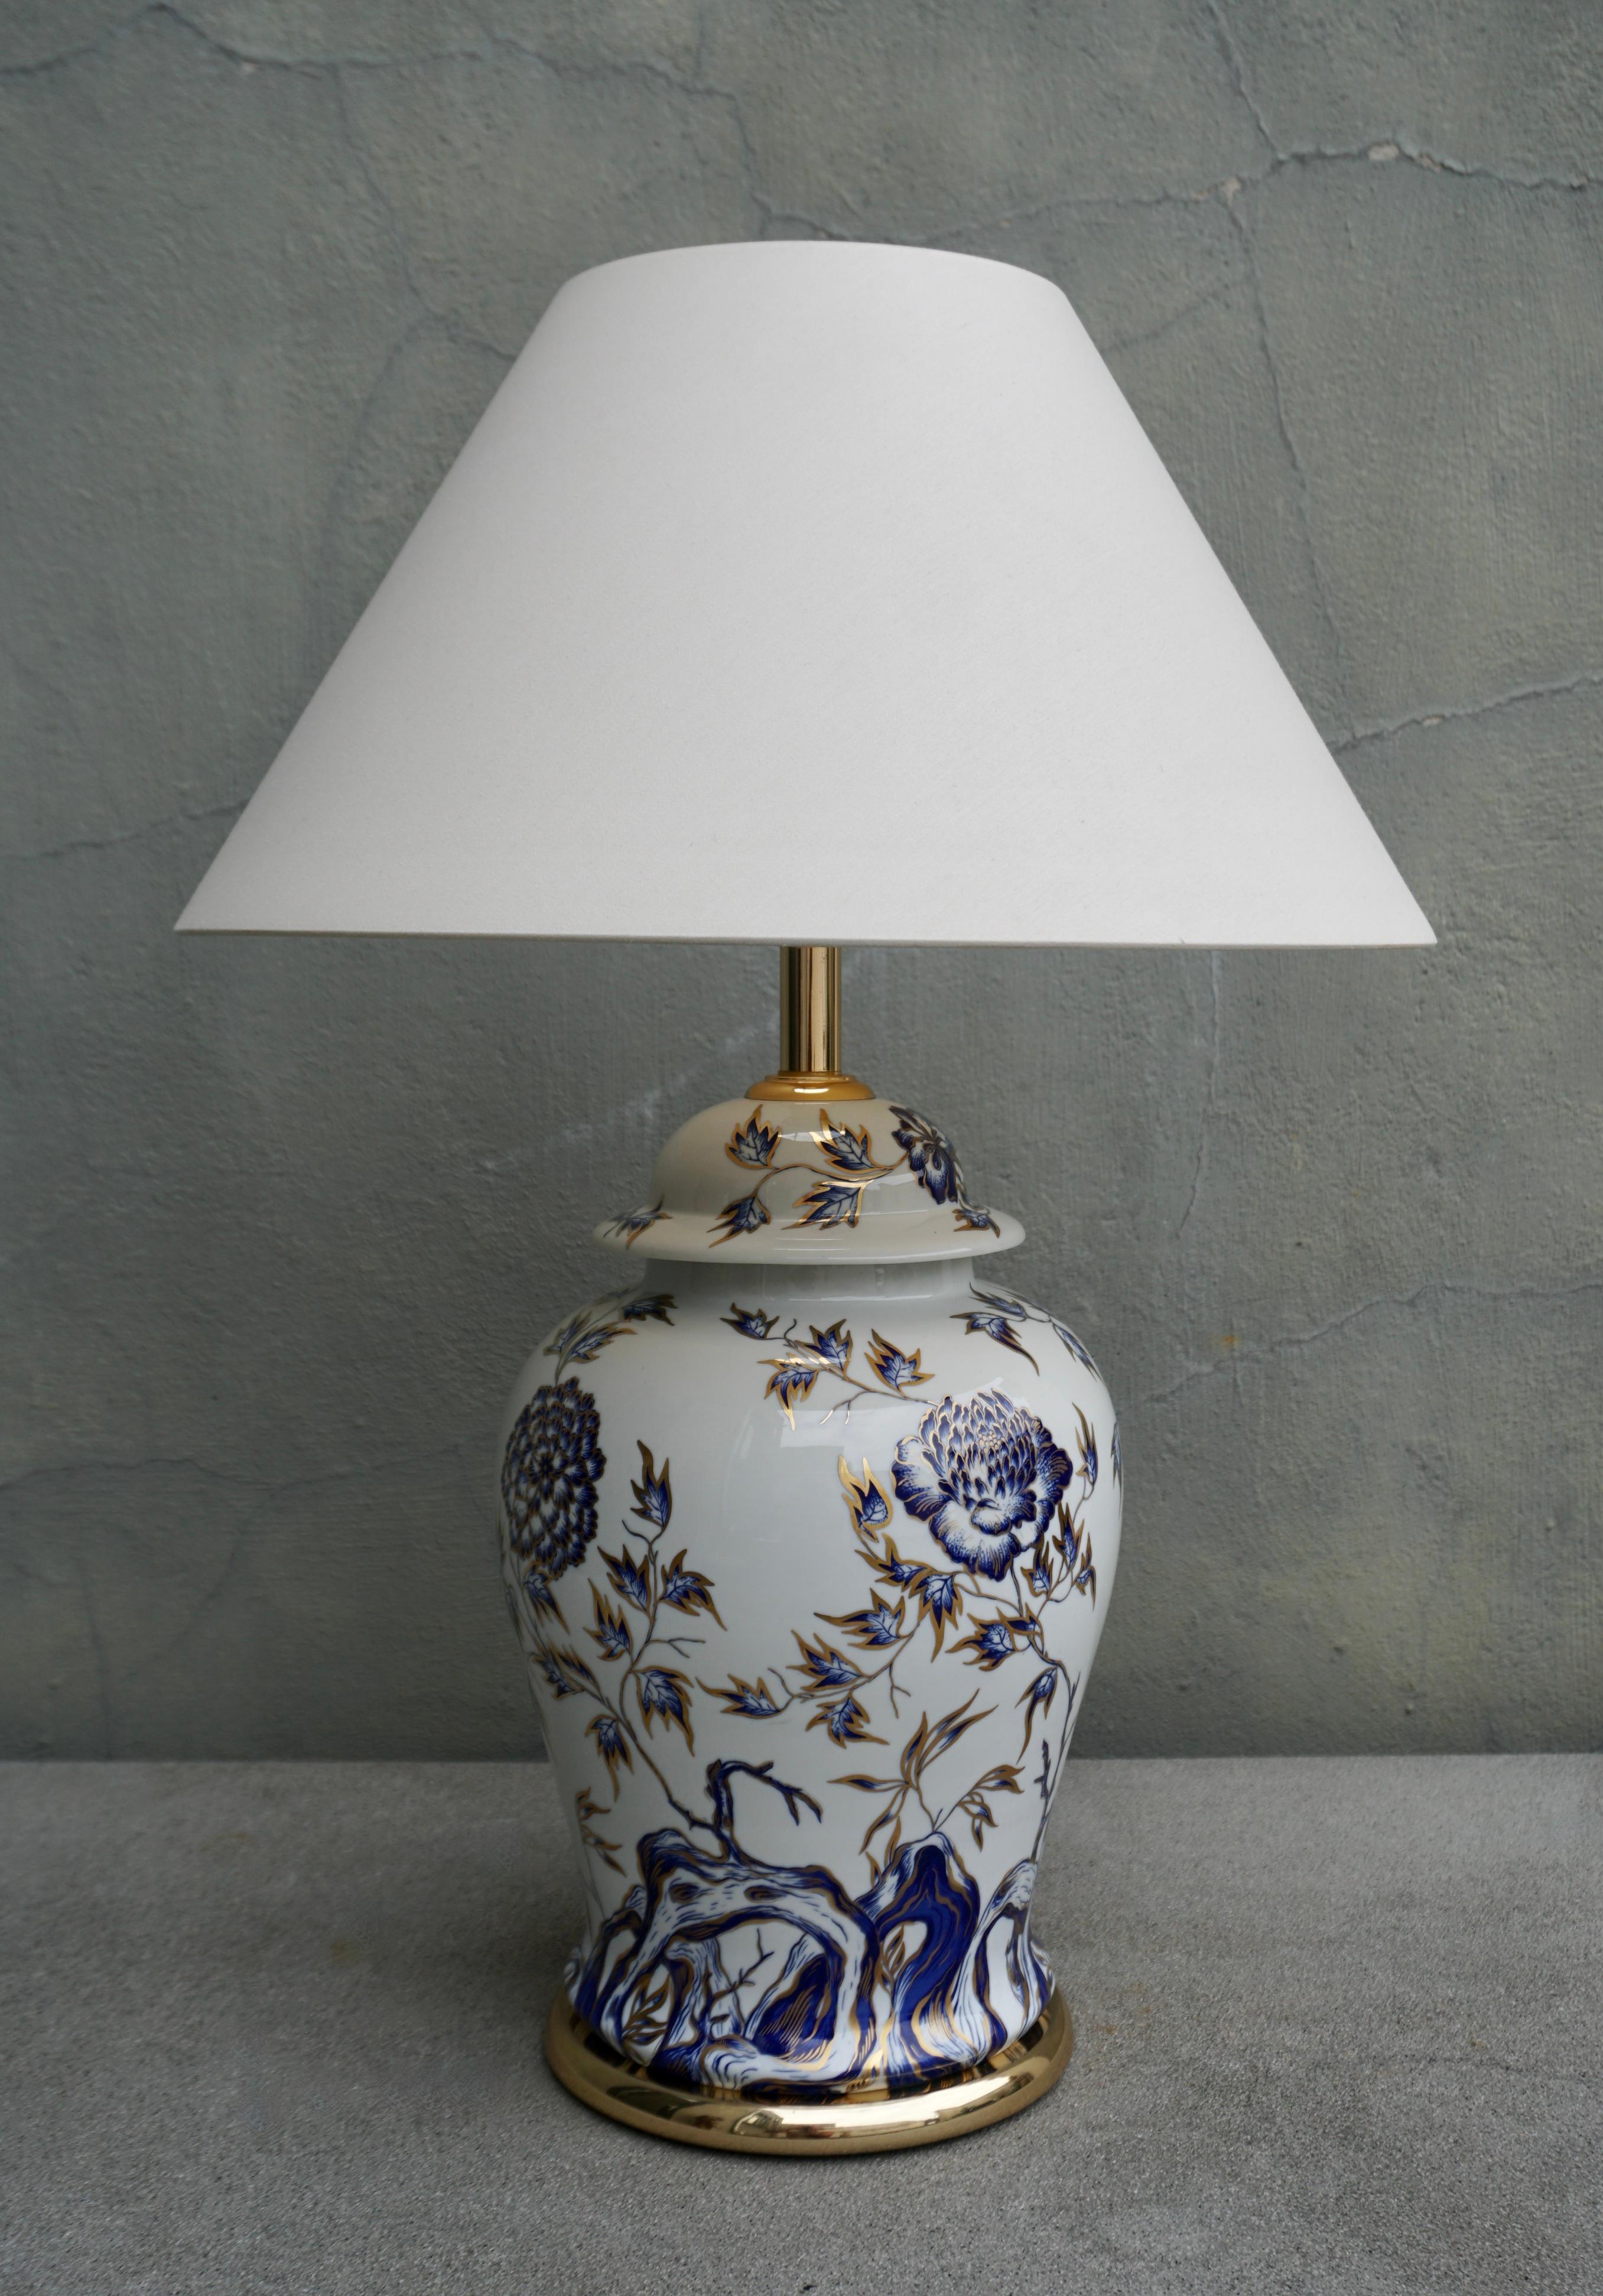 Mangani, Italy Classically Designed Porcelain Table Lamp   

Offered for sale is a classically designed Italian porcelain table lamp by Mangani. Porcelain lidded urn, in ginger jar form, decorated in white, blue and gold flowers, on graduated brass